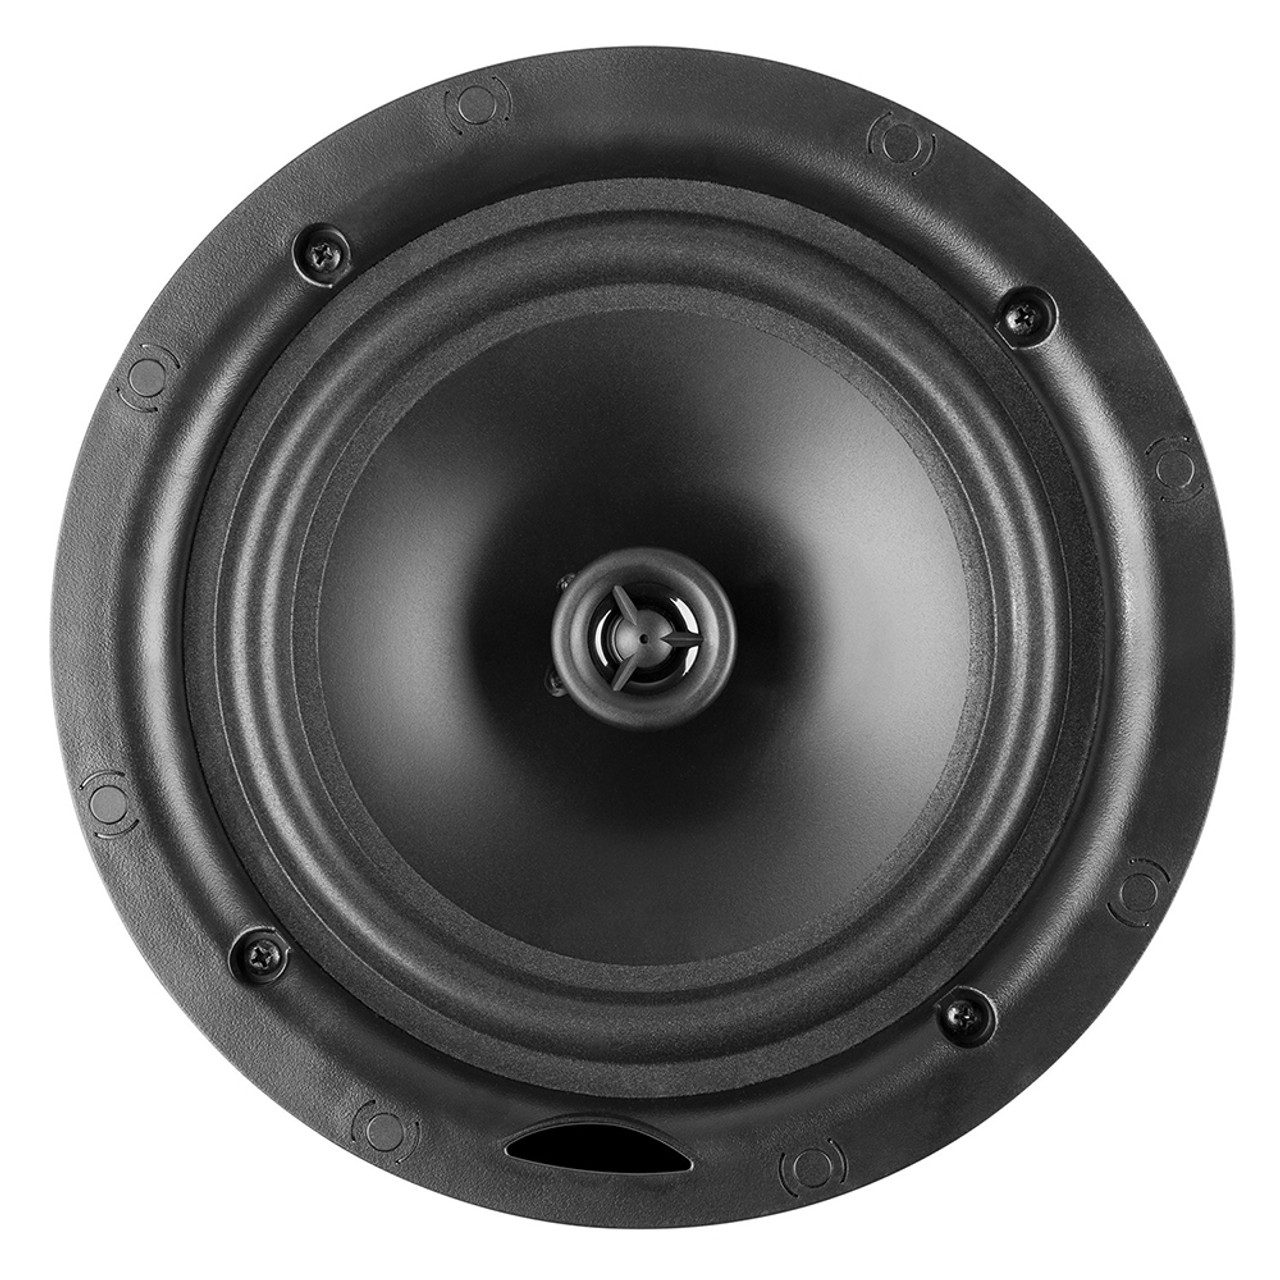 Power Dynamics NCSP6 6.5" Low Profile 100V In-Ceiling Speakers (Each)